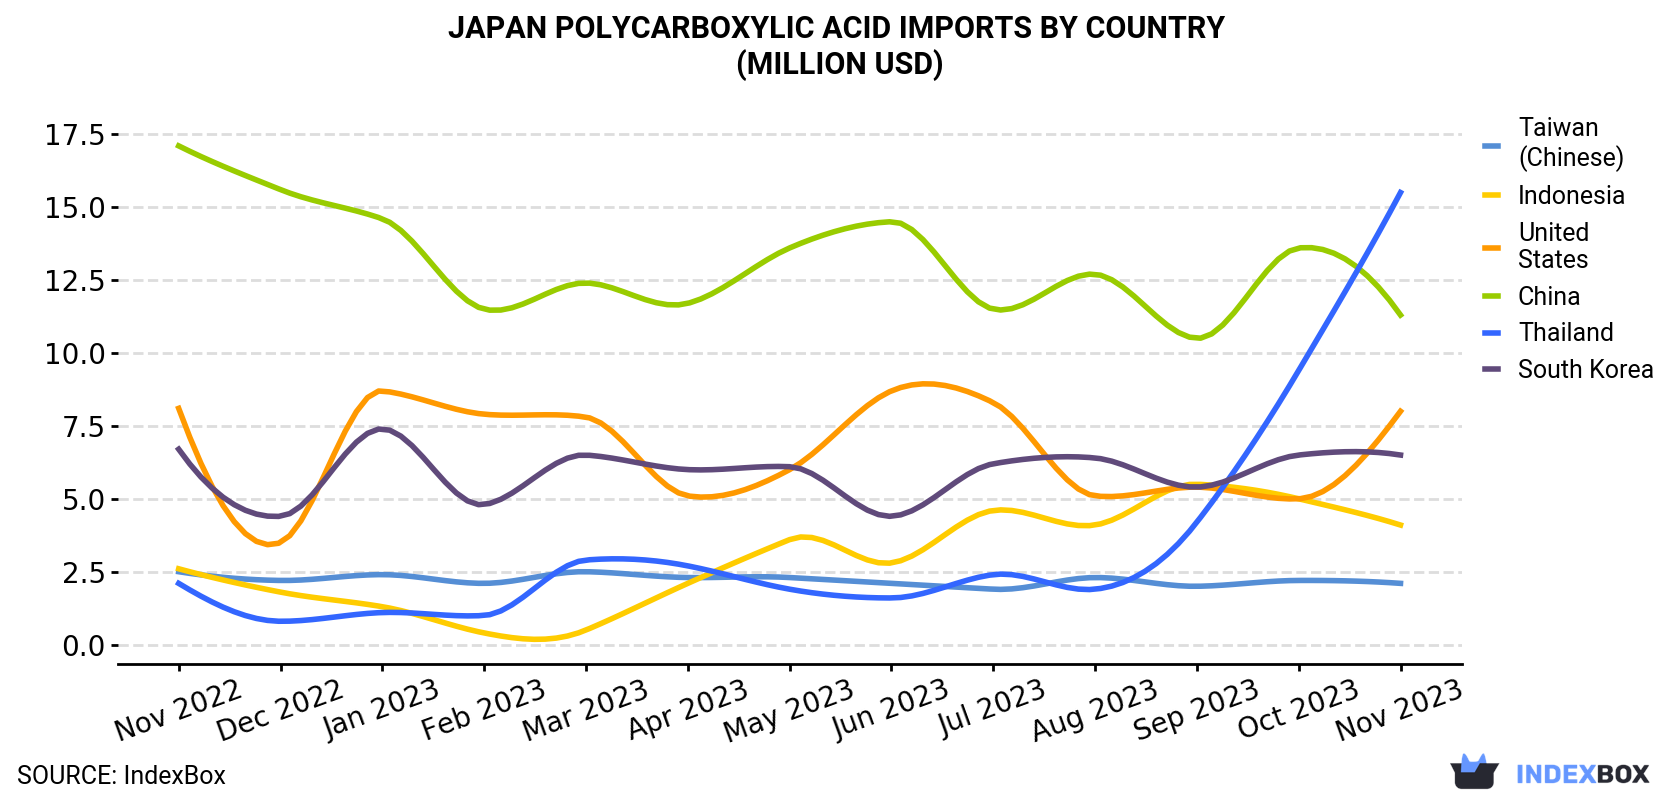 Japan Polycarboxylic Acid Imports By Country (Million USD)